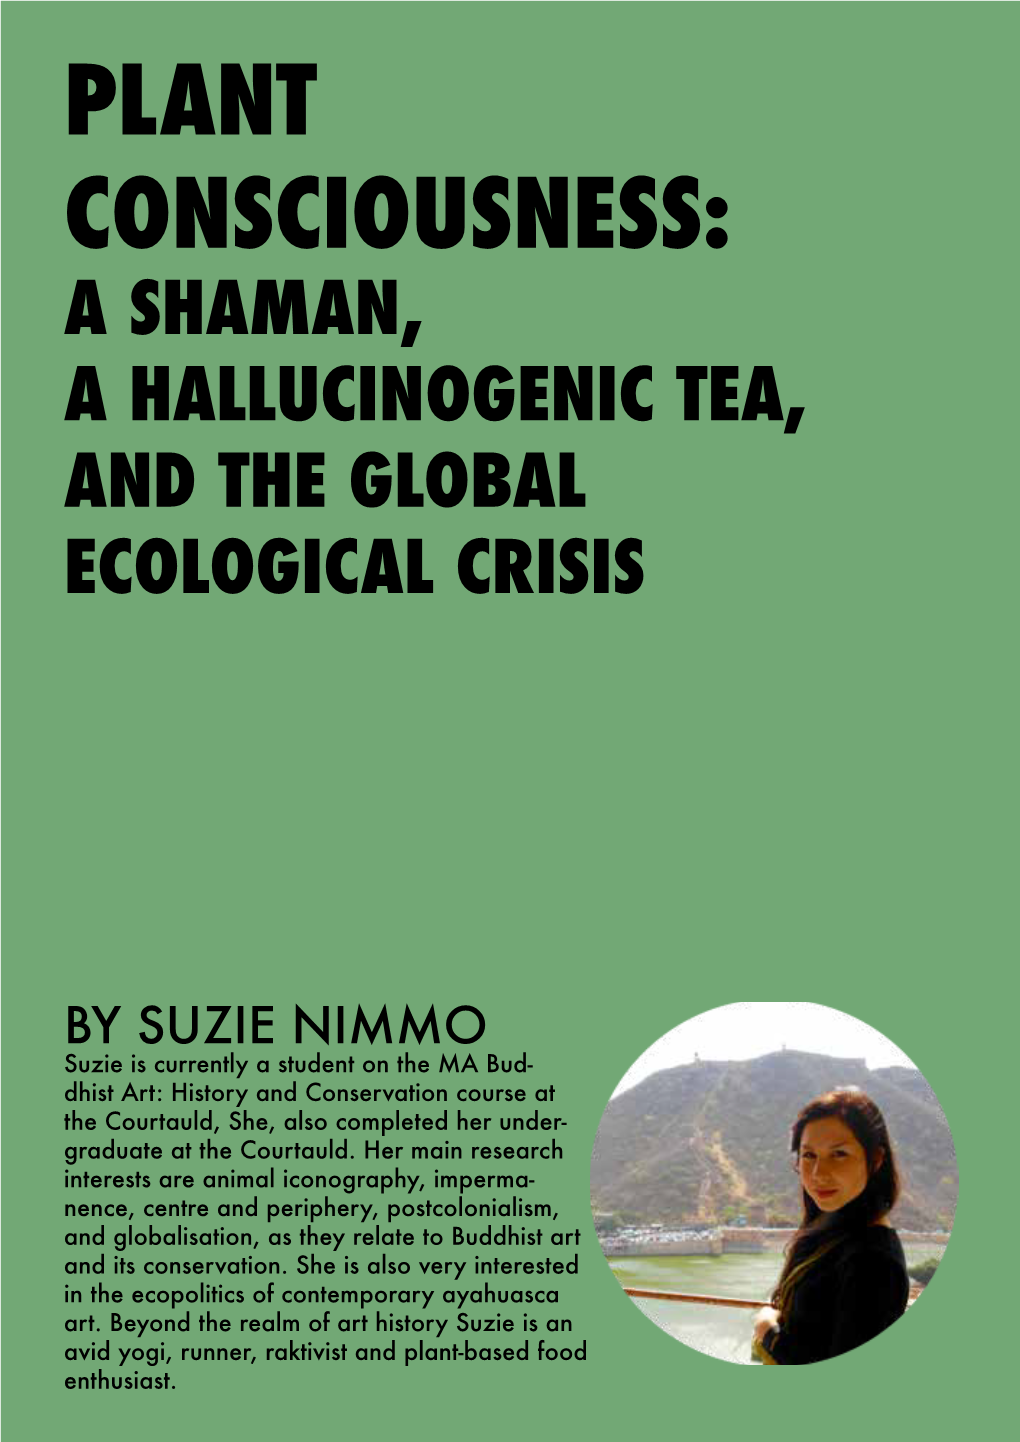 Plant Consciousness: a Shaman, a Hallucinogenic Tea, and the Global Ecological Crisis